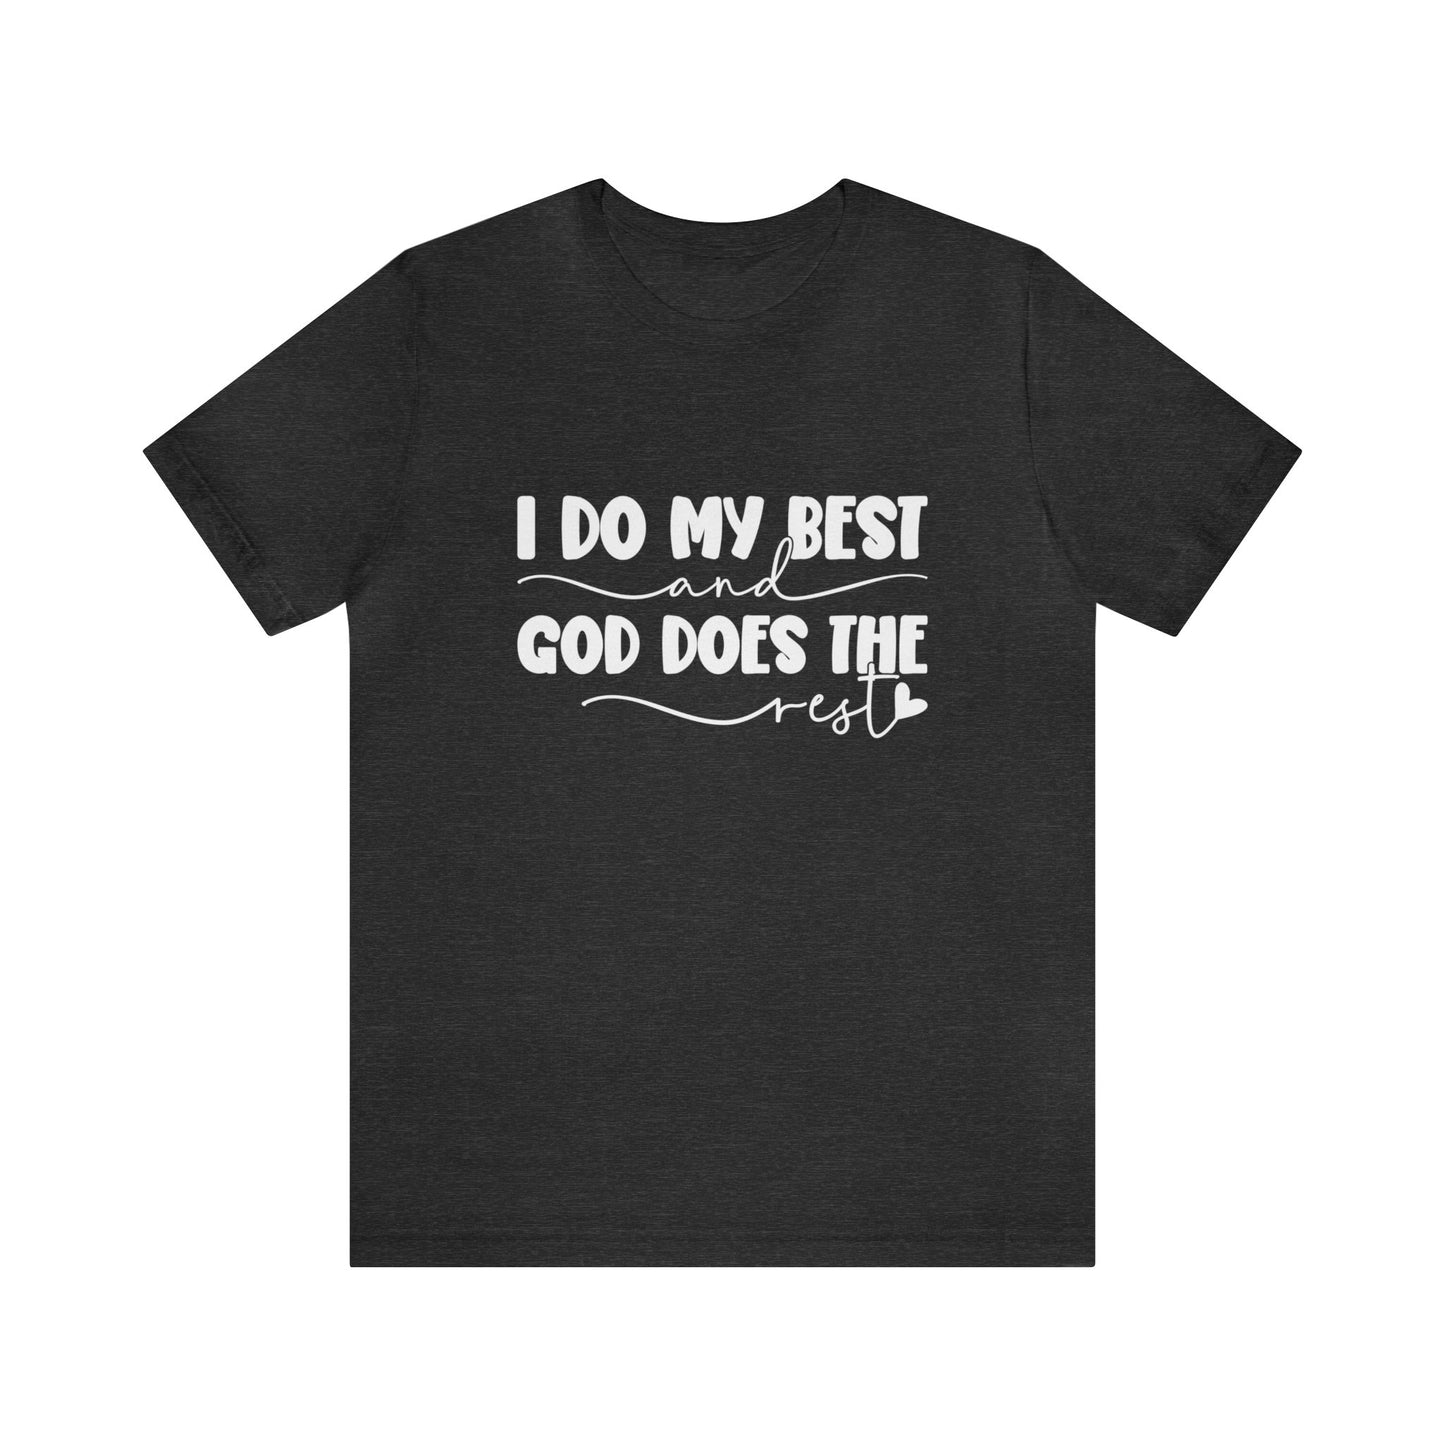 I do my best & God does the rest Women's Tshirt